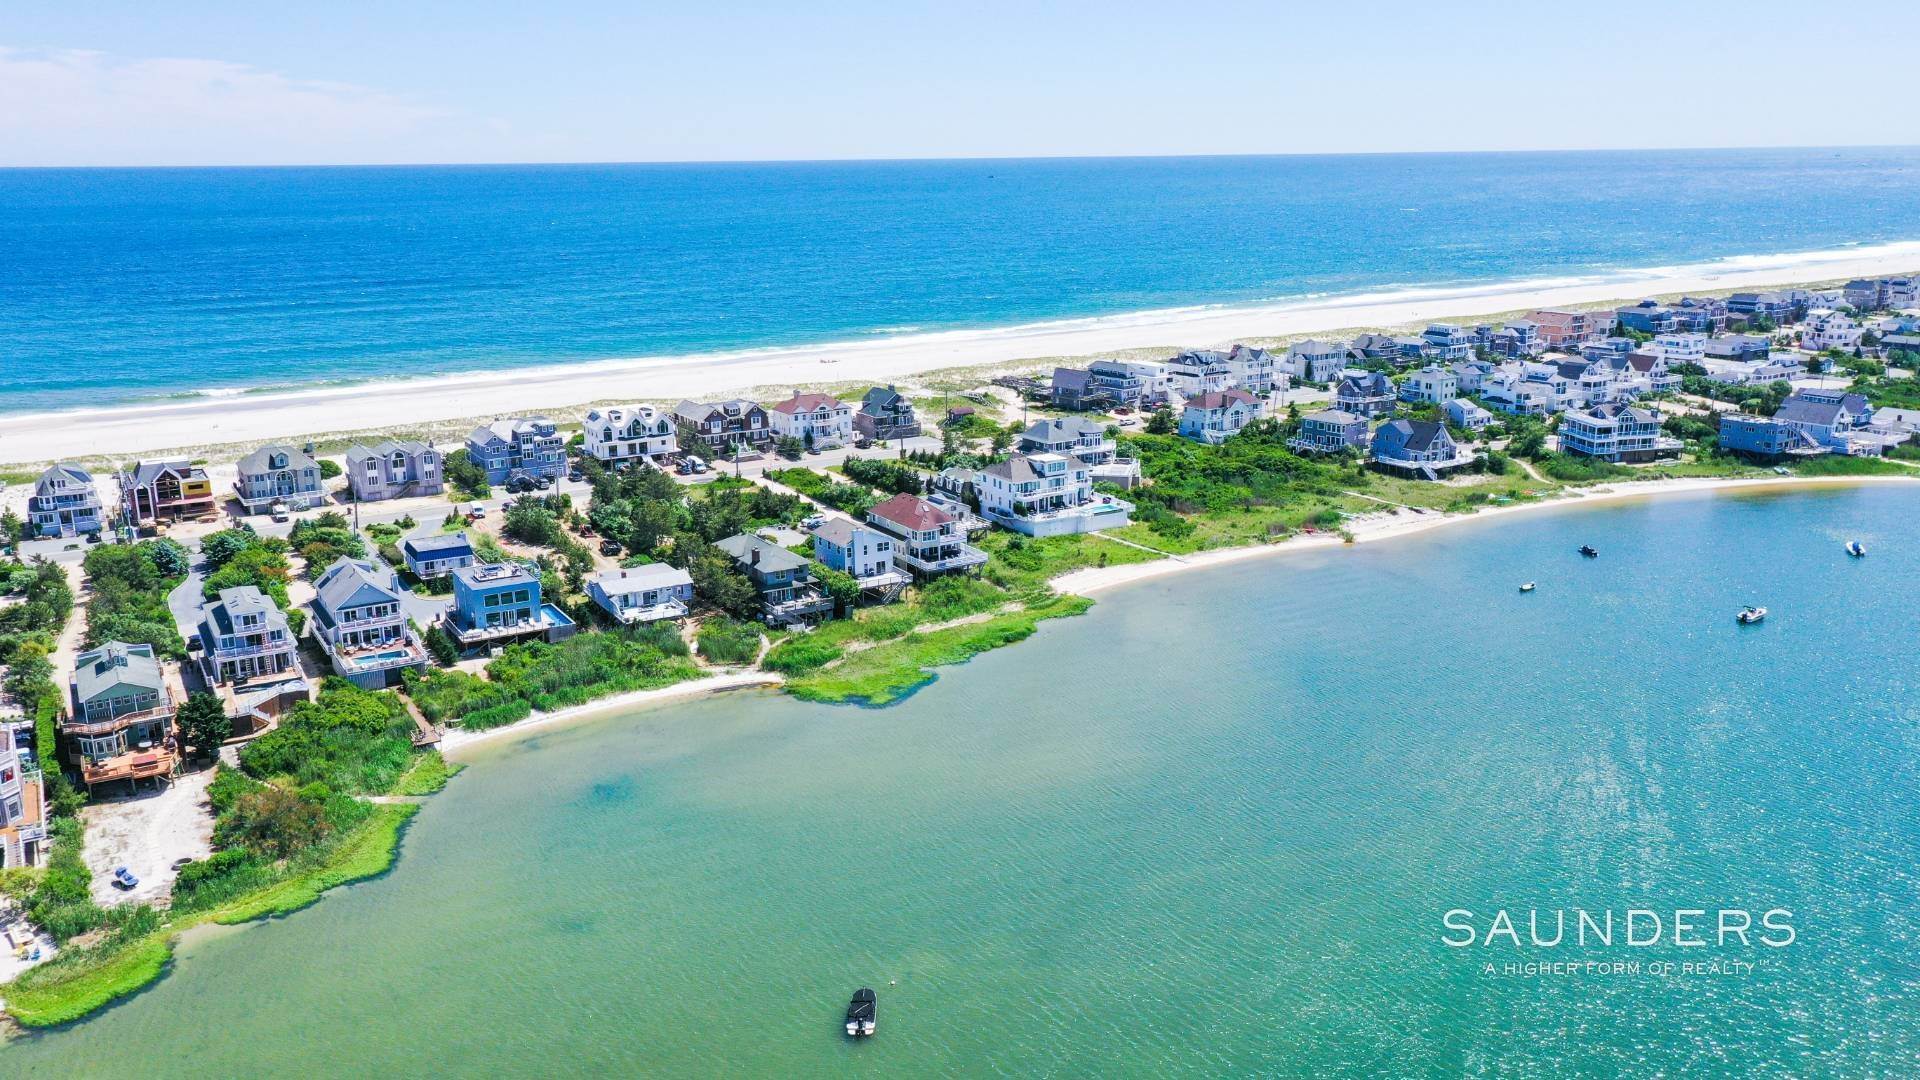 4. Single Family Homes for Sale at Waterfront Beauty With Sandy Bay Beach 854 Dune Road, Westhampton Dunes Village, NY 11978